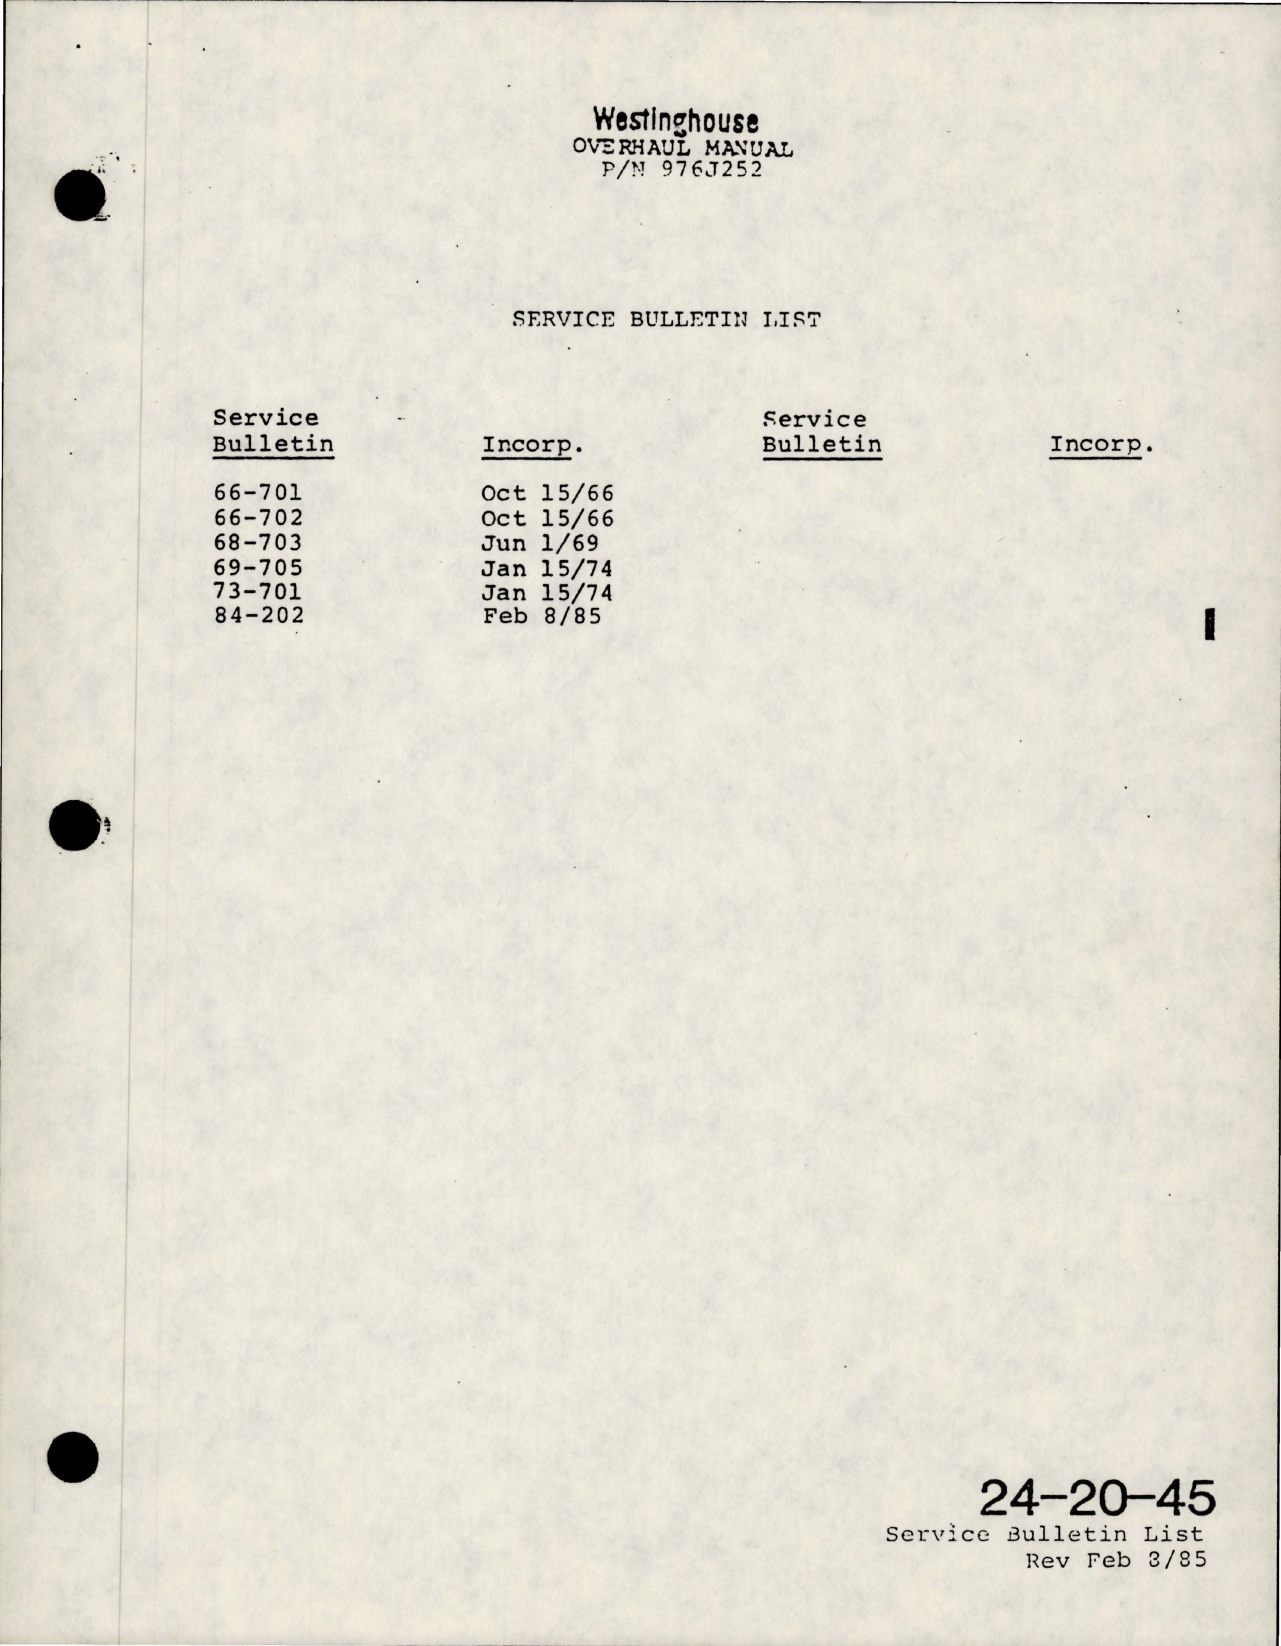 Sample page 9 from AirCorps Library document: Maintenance Manual w Parts List for AC Generator - Parts 976J252-3 and 976J252-6